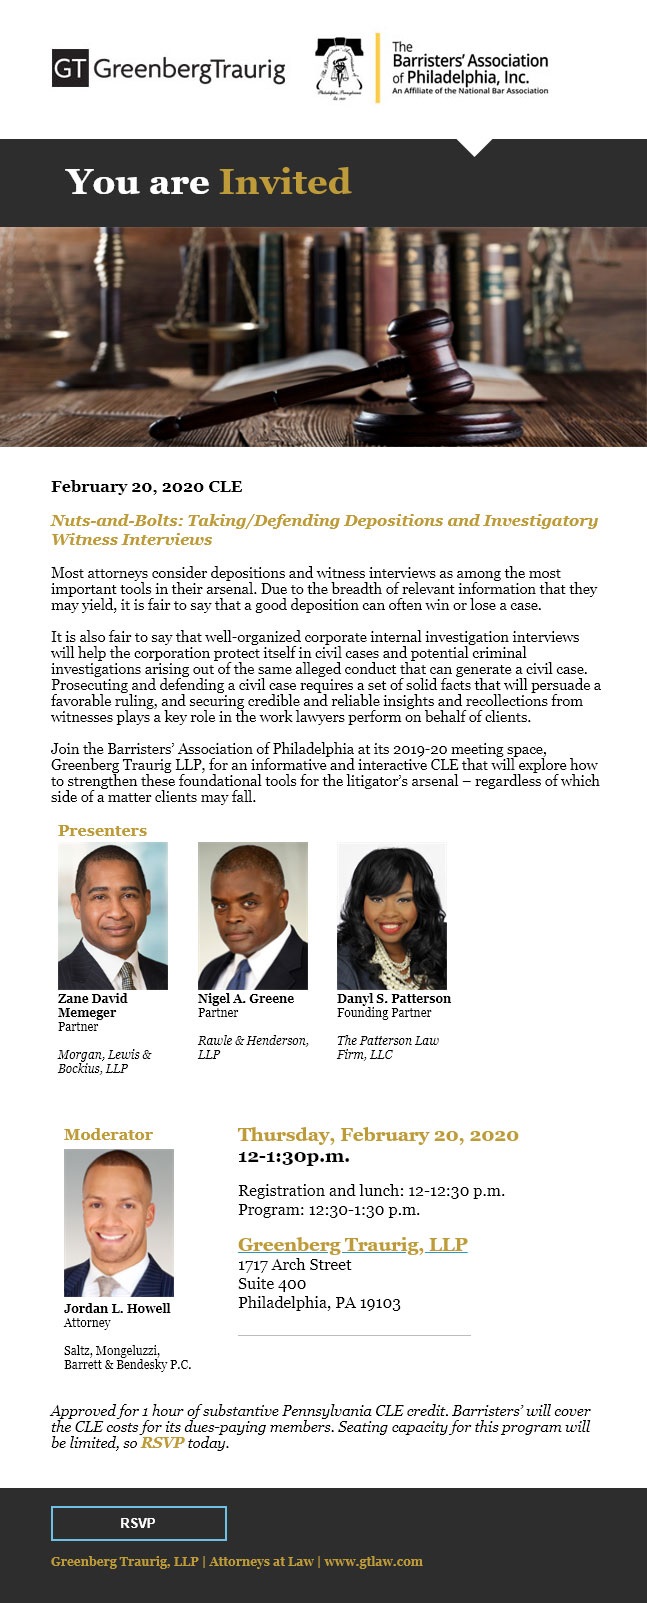 February CLE: “Taking and Defending Depositions and Investigatory Witness Interviews”